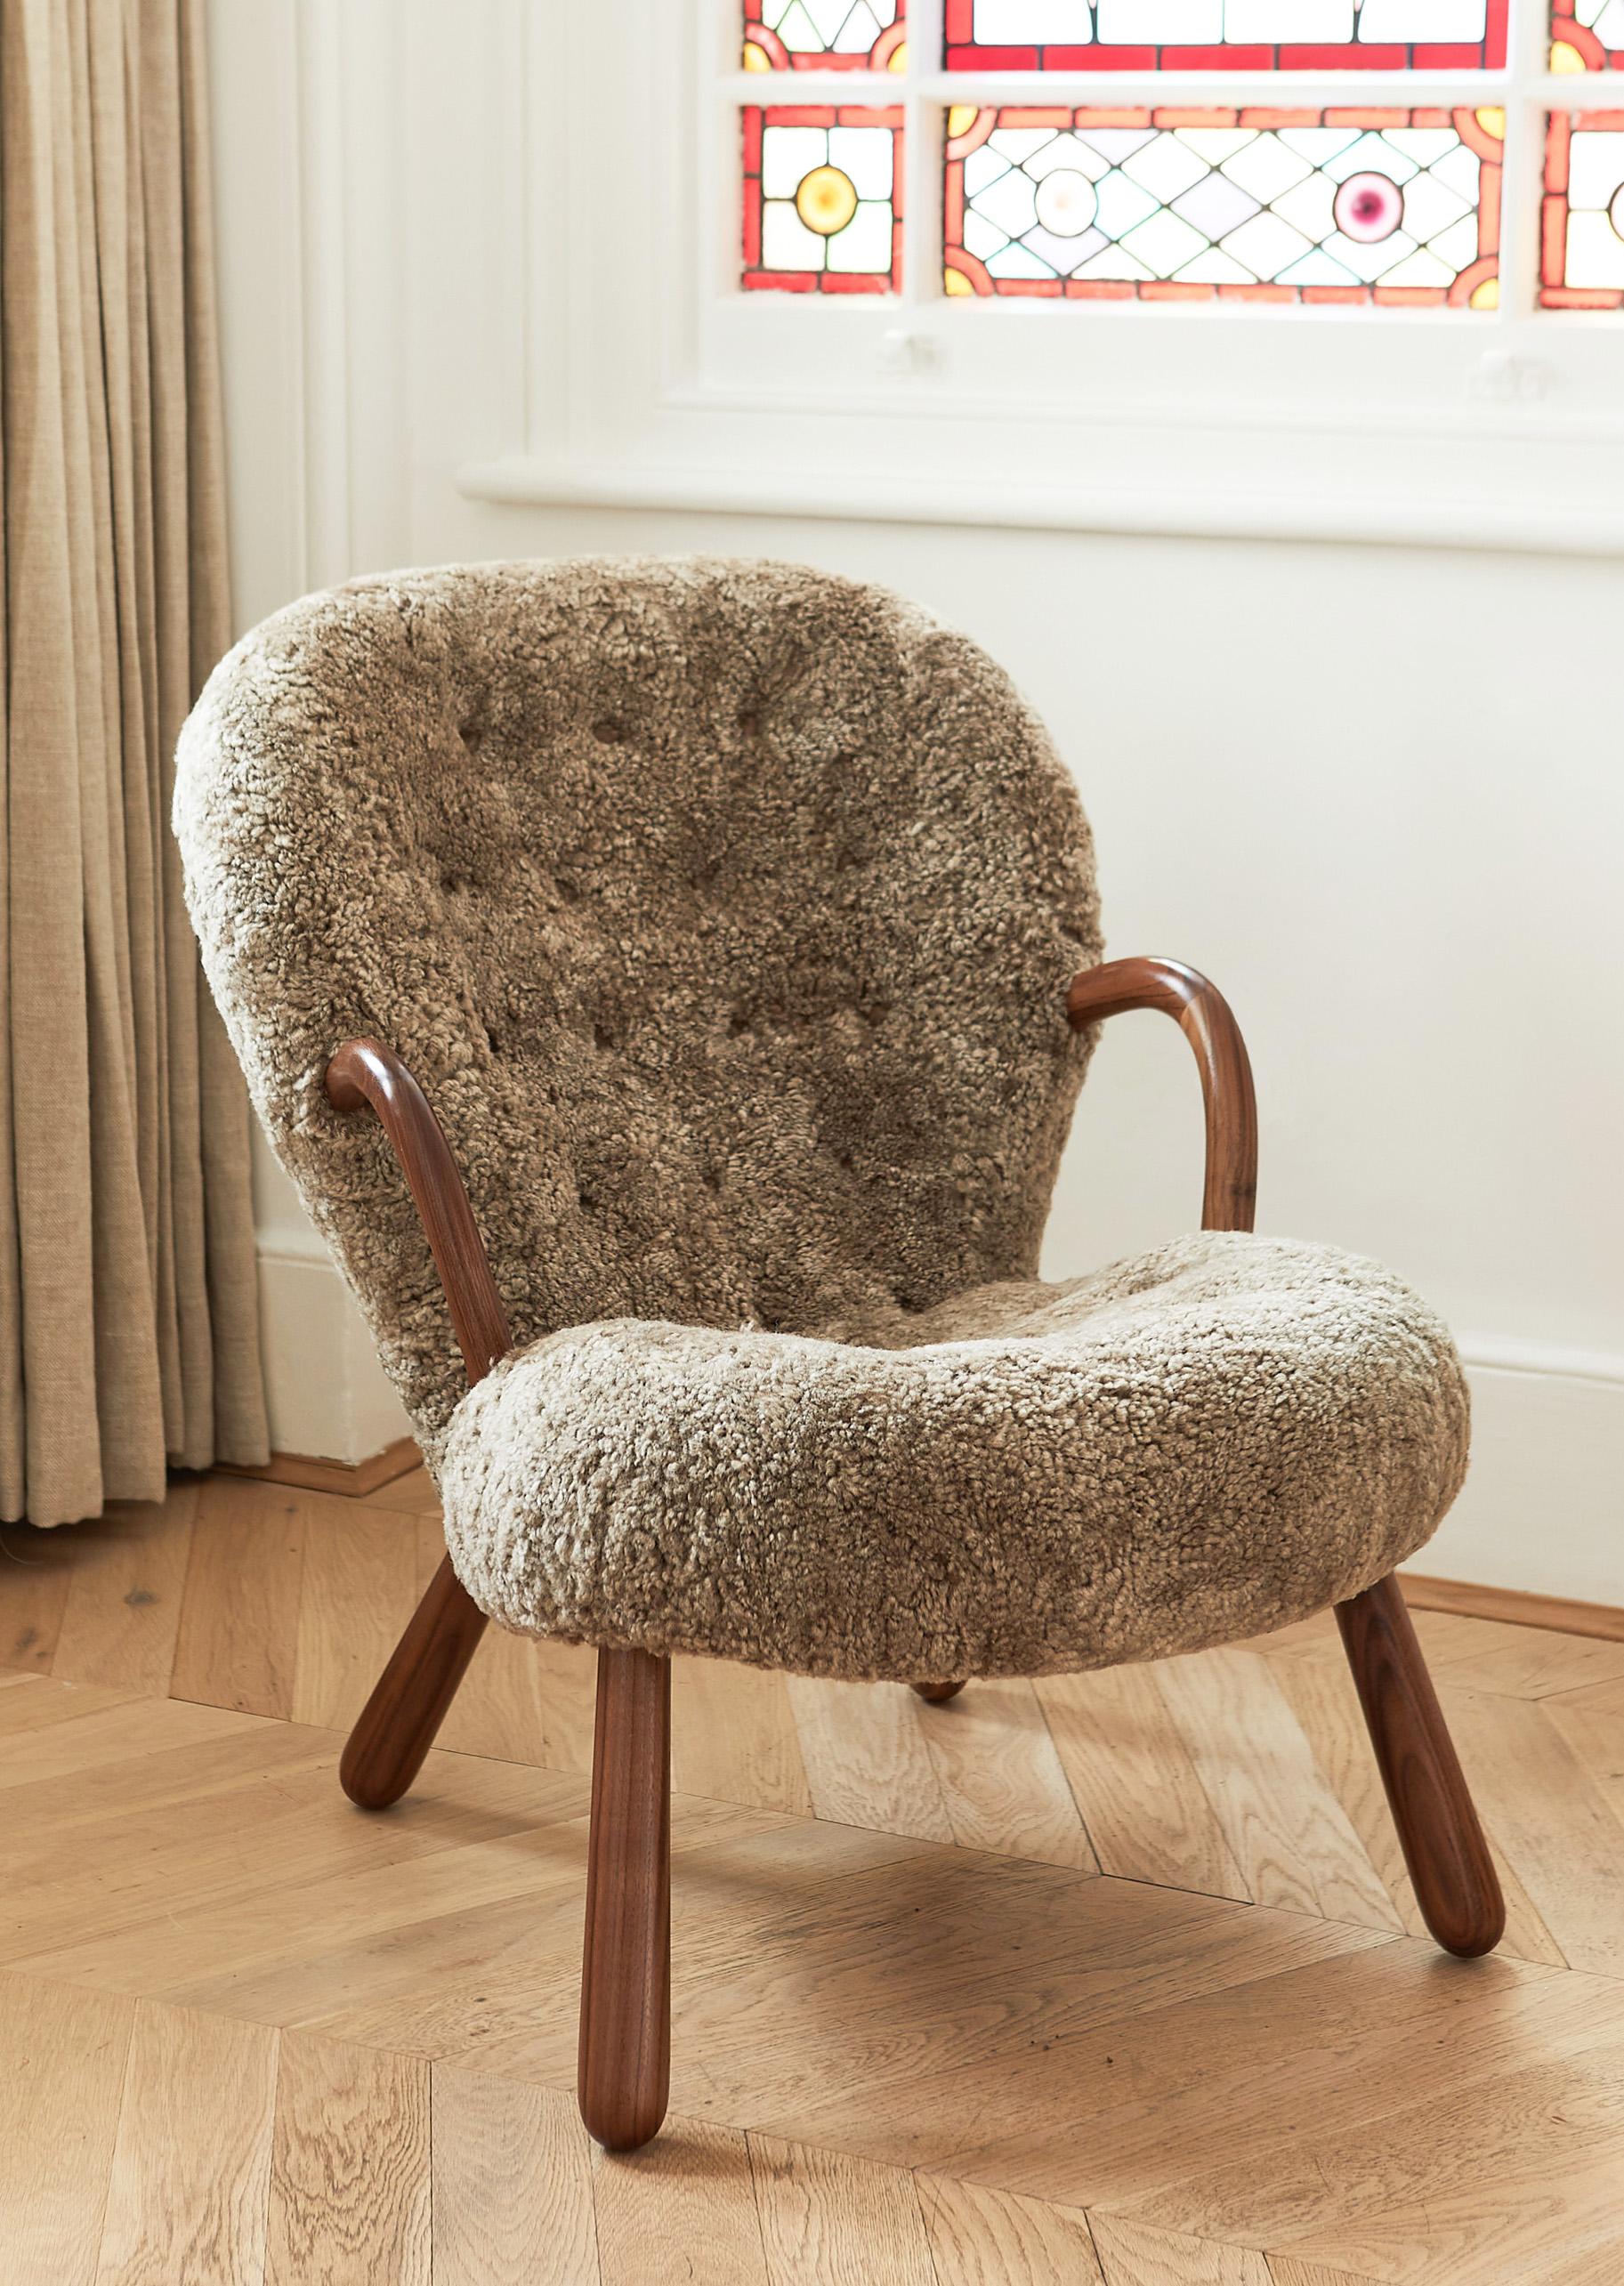 Re-Edition Sheepskin Clam Chair by Arnold Madsen For Sale 2